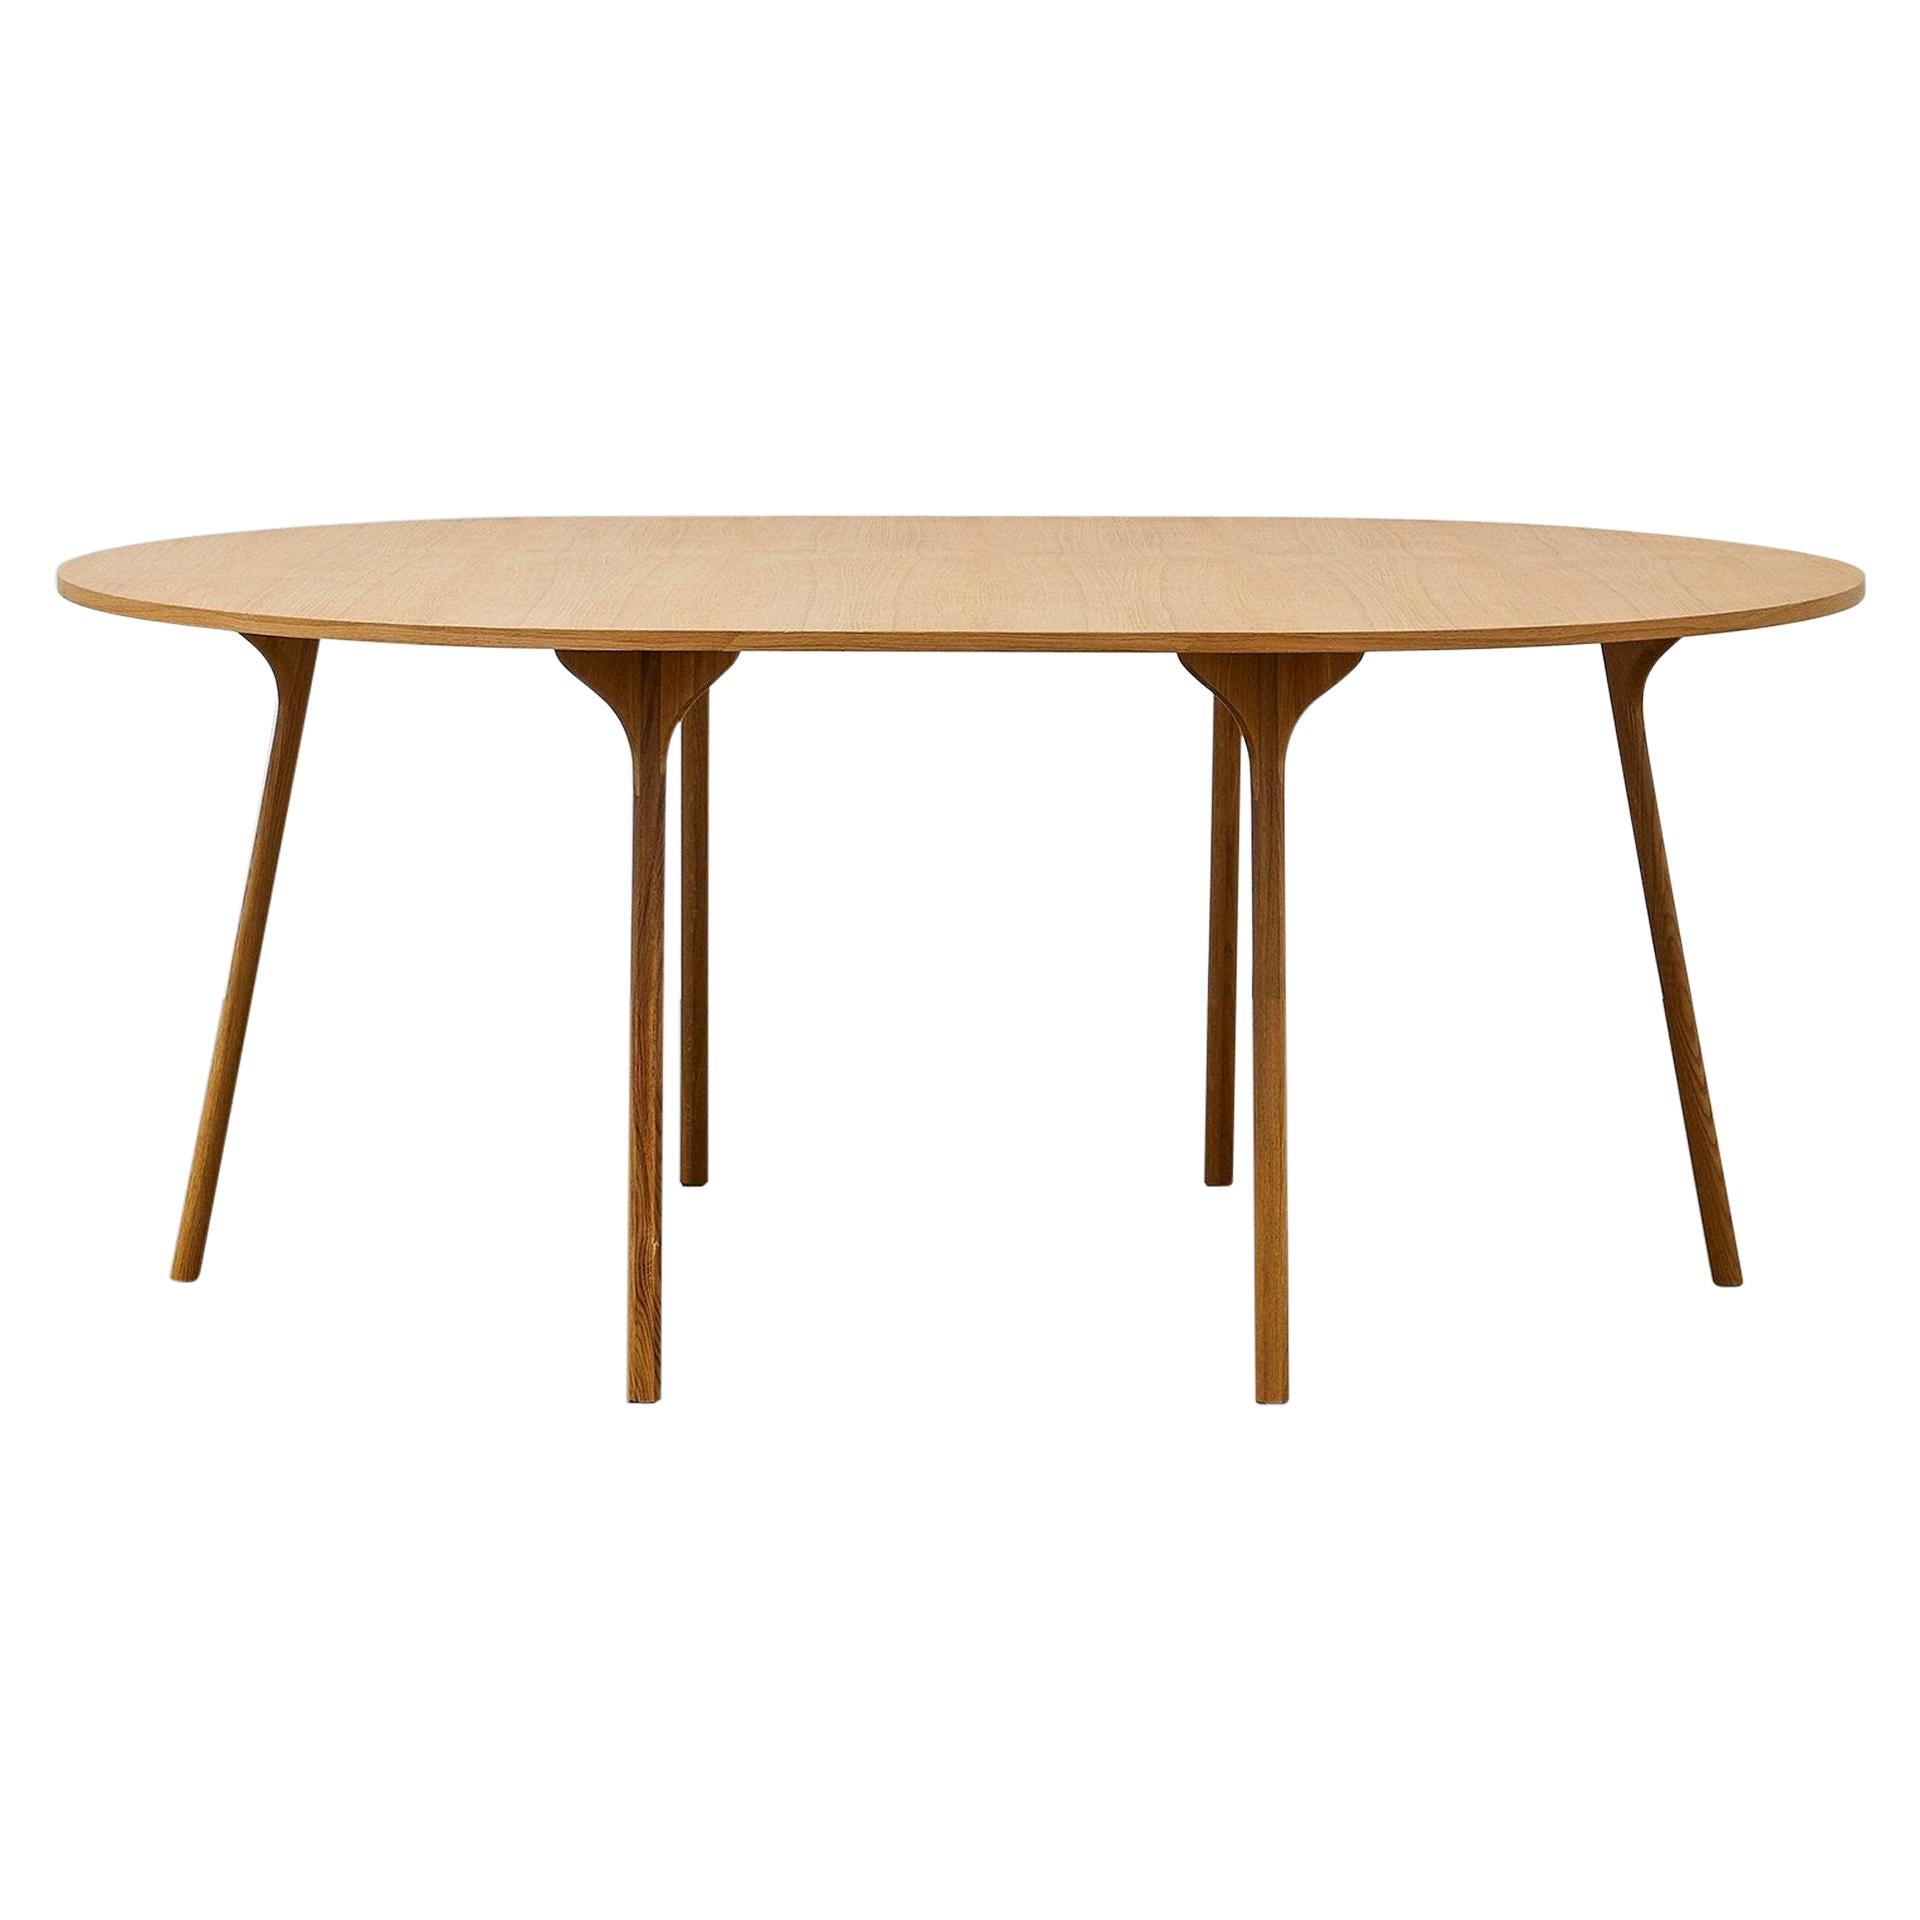 PH Circle Table, 1270x1820mm, Natural Oak Wood Legs, Veneer Table Plate and Edge For Sale